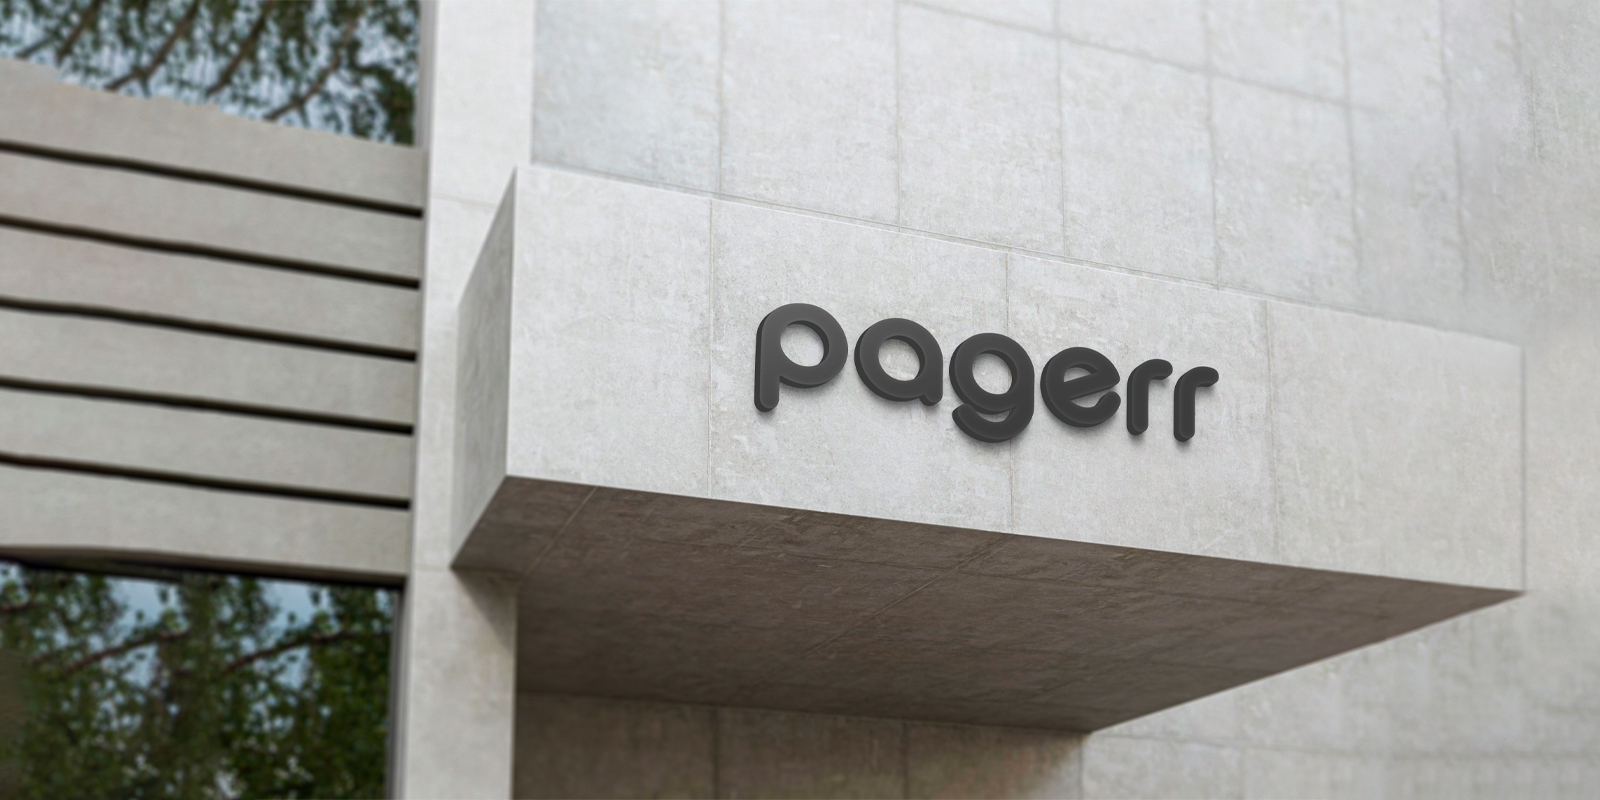 Logo signs in Townsville - Print with Pagerr